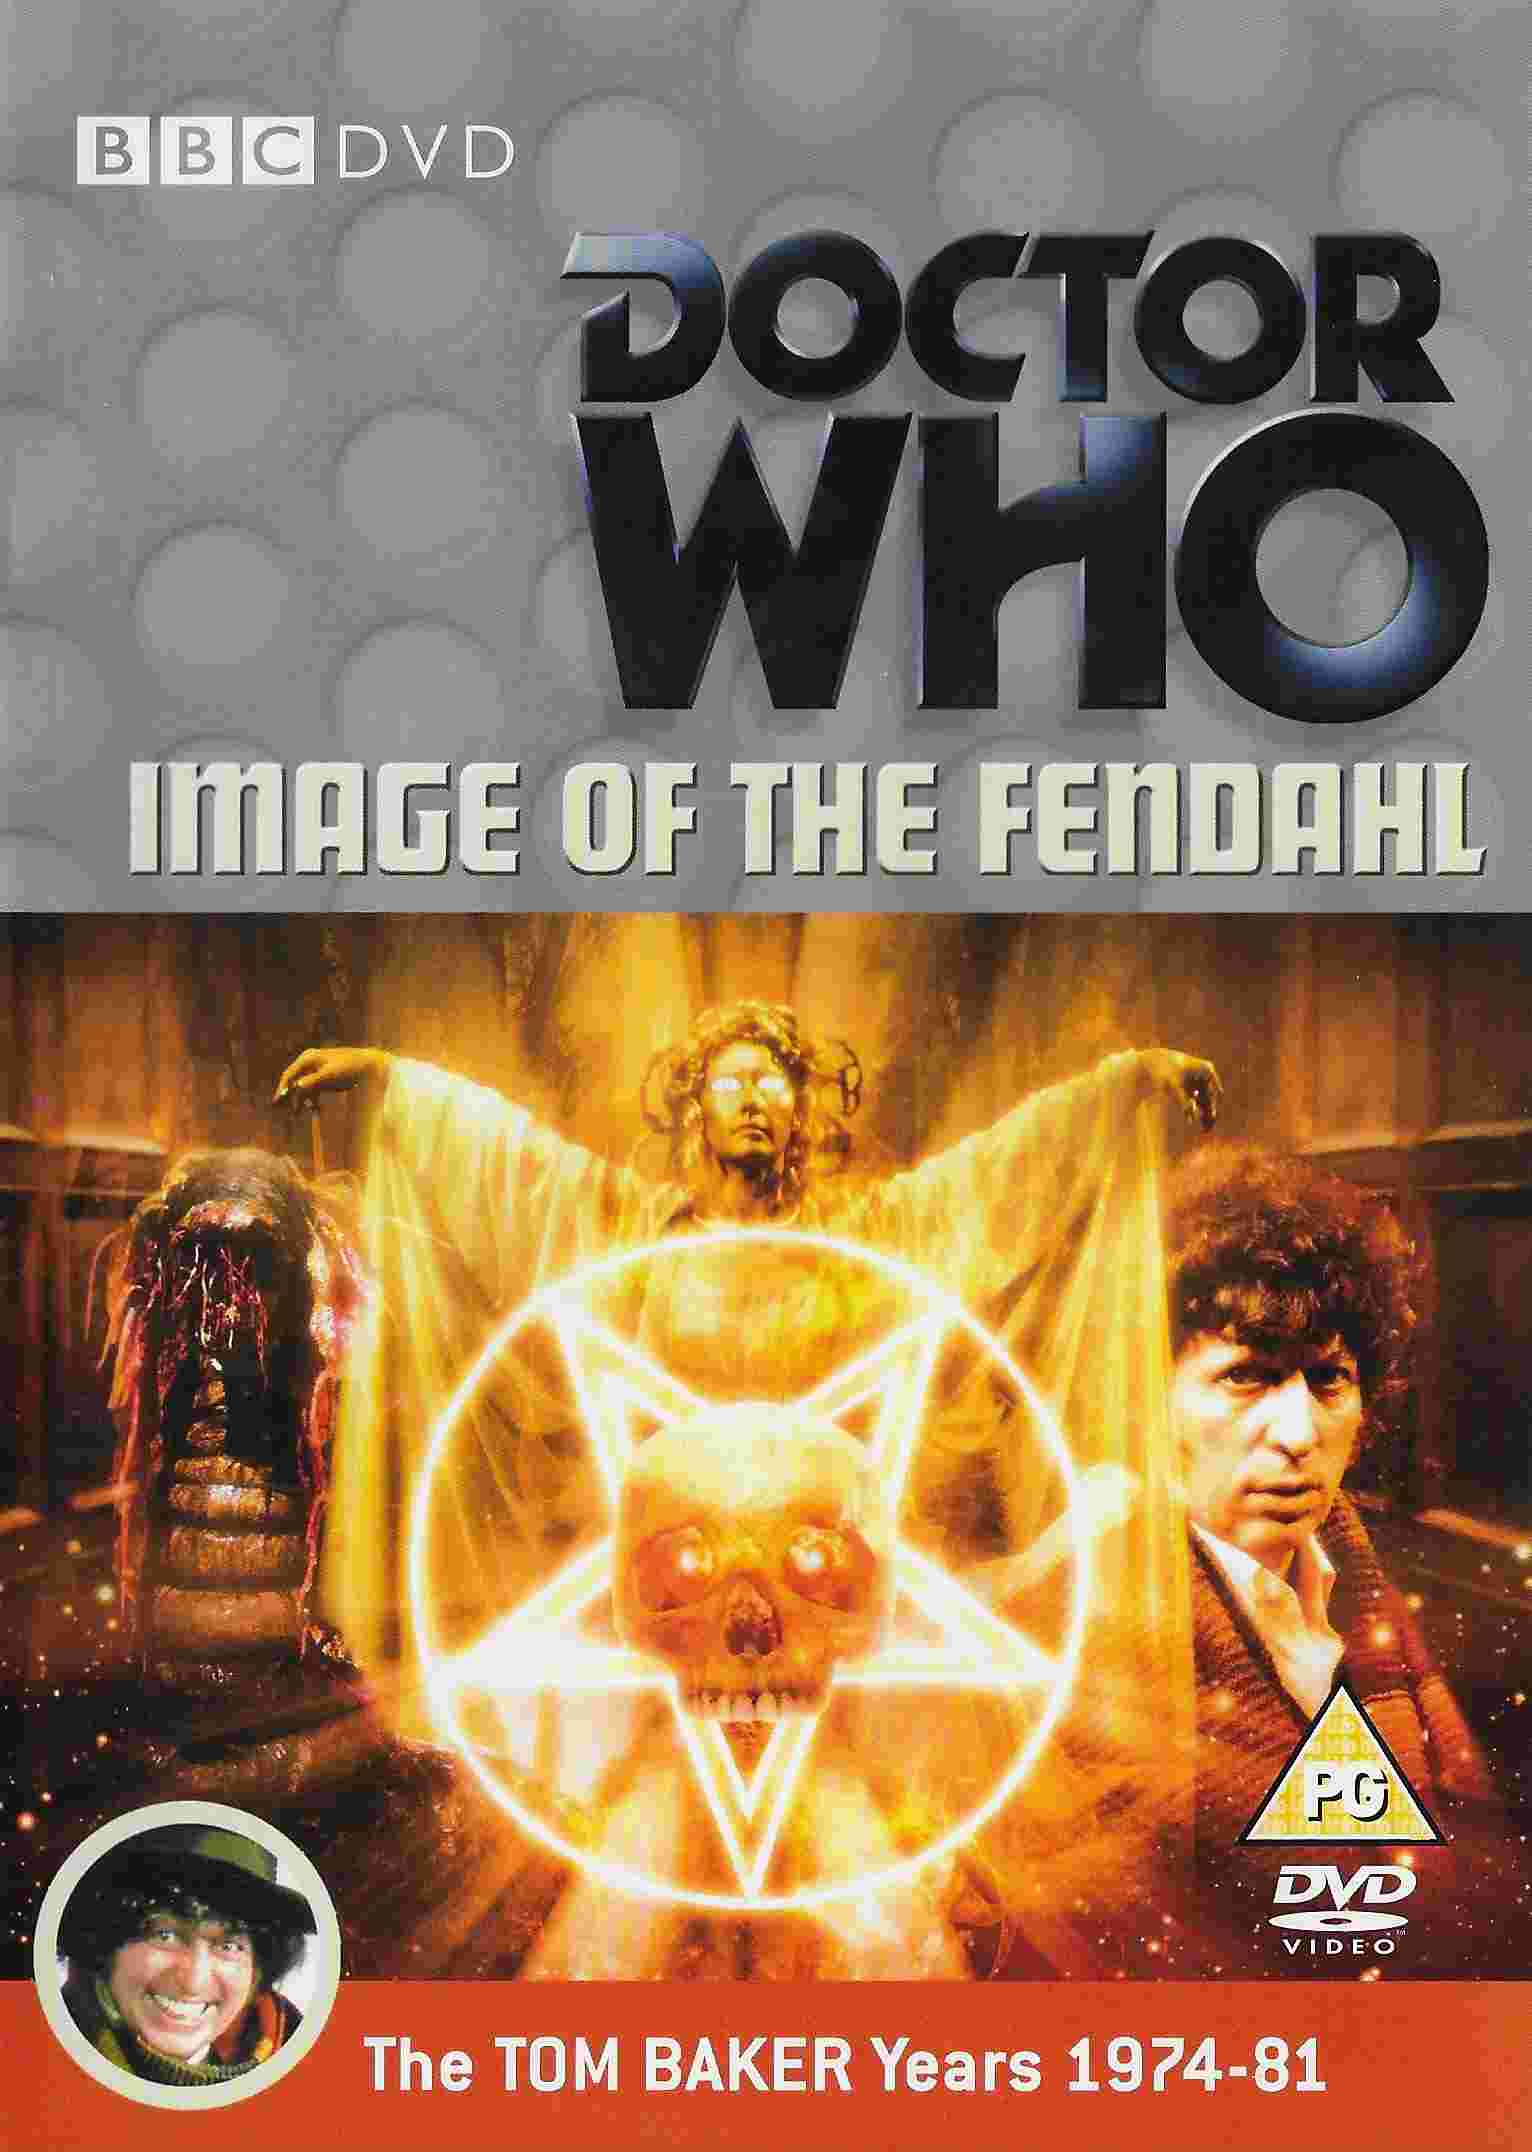 Picture of BBCDVD 1820 Doctor Who - Image of the Fendahl by artist Chris Boucher from the BBC records and Tapes library